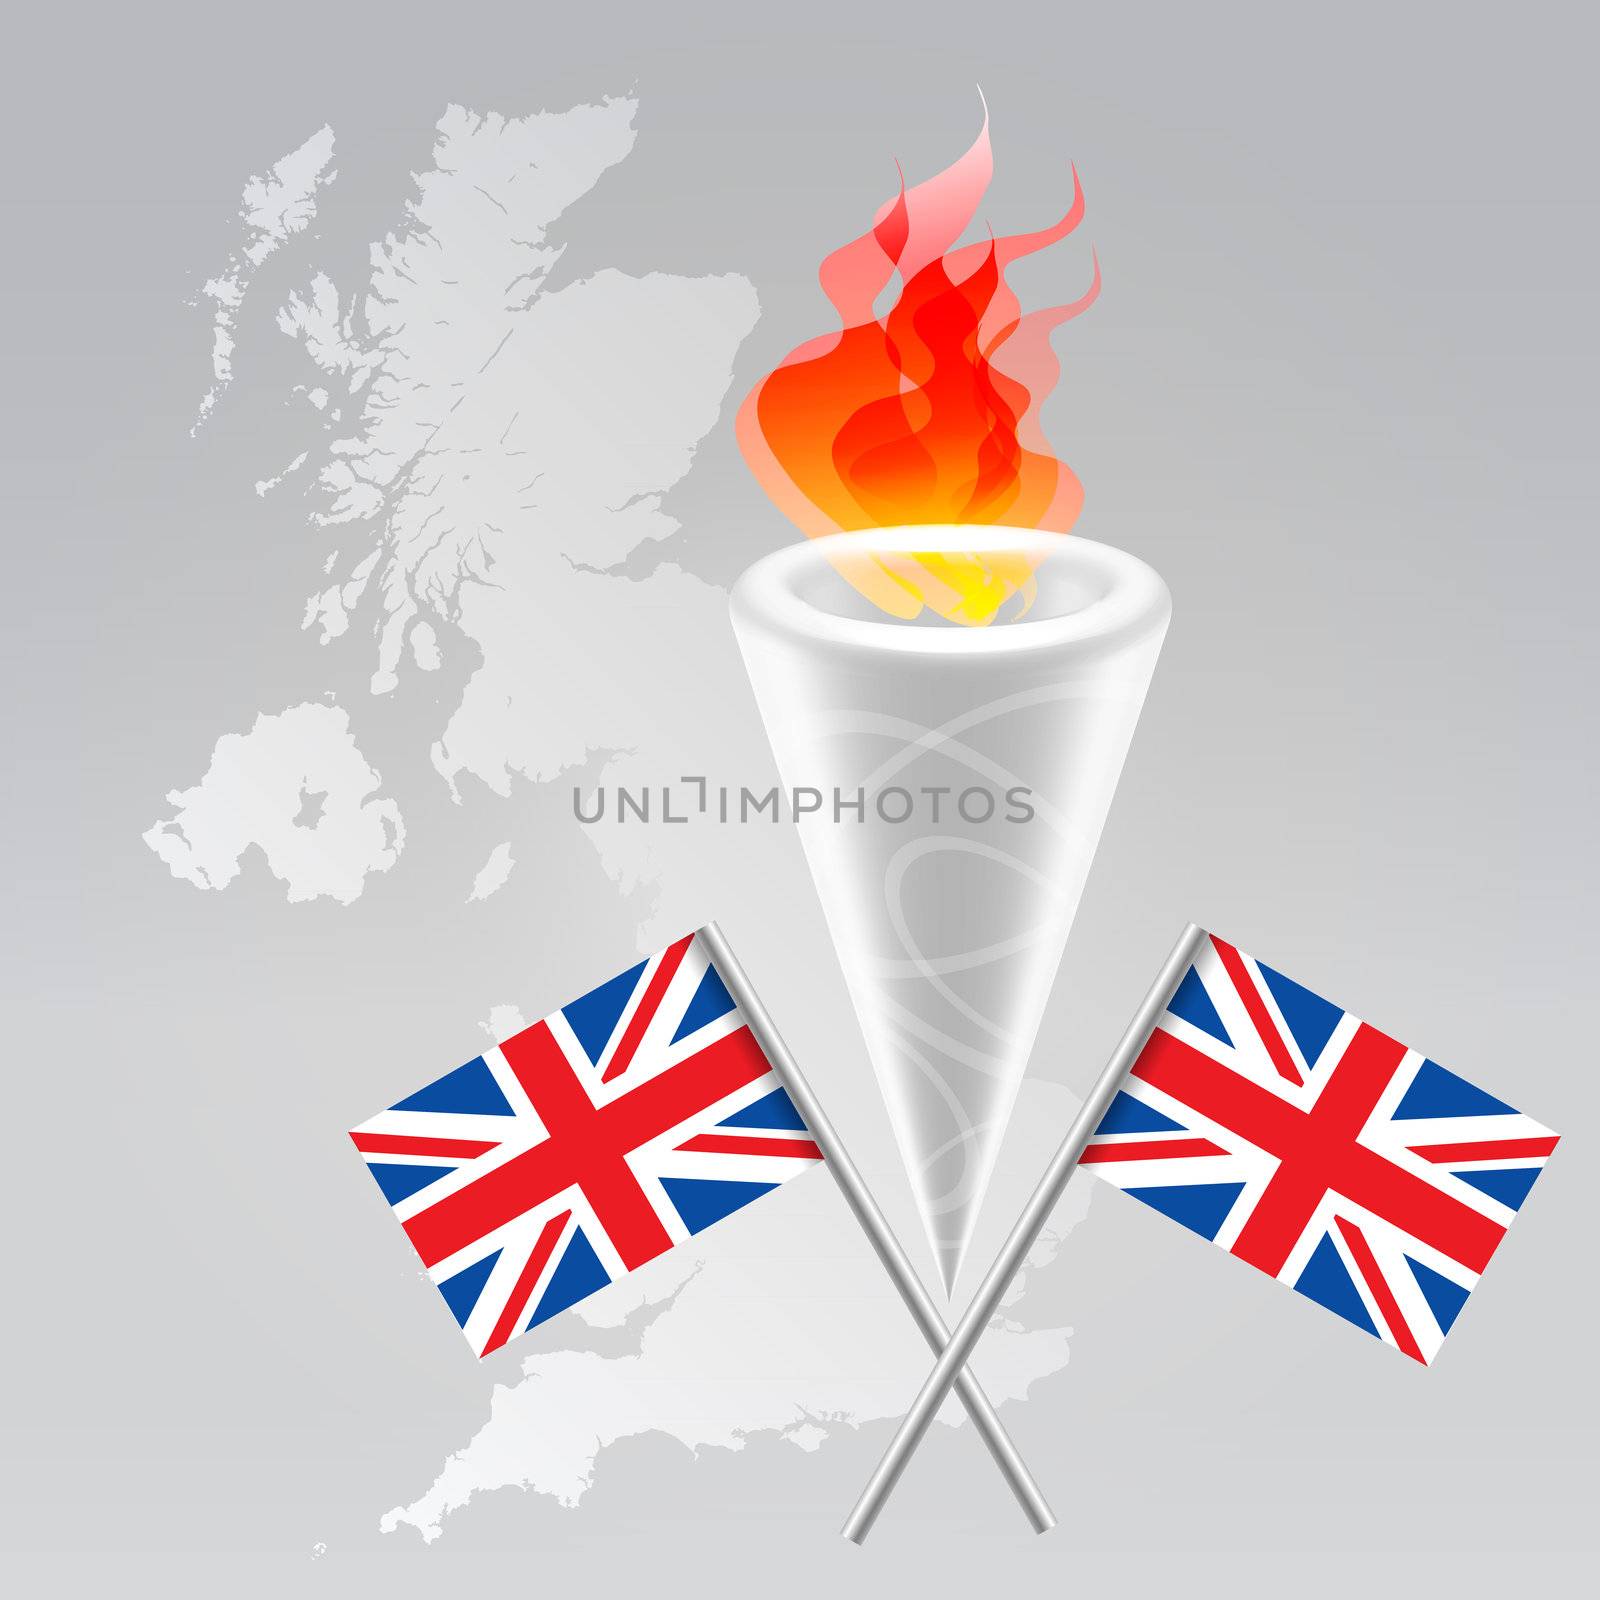 Olympic symbols set: fire torch, flag, UK map silhouette.